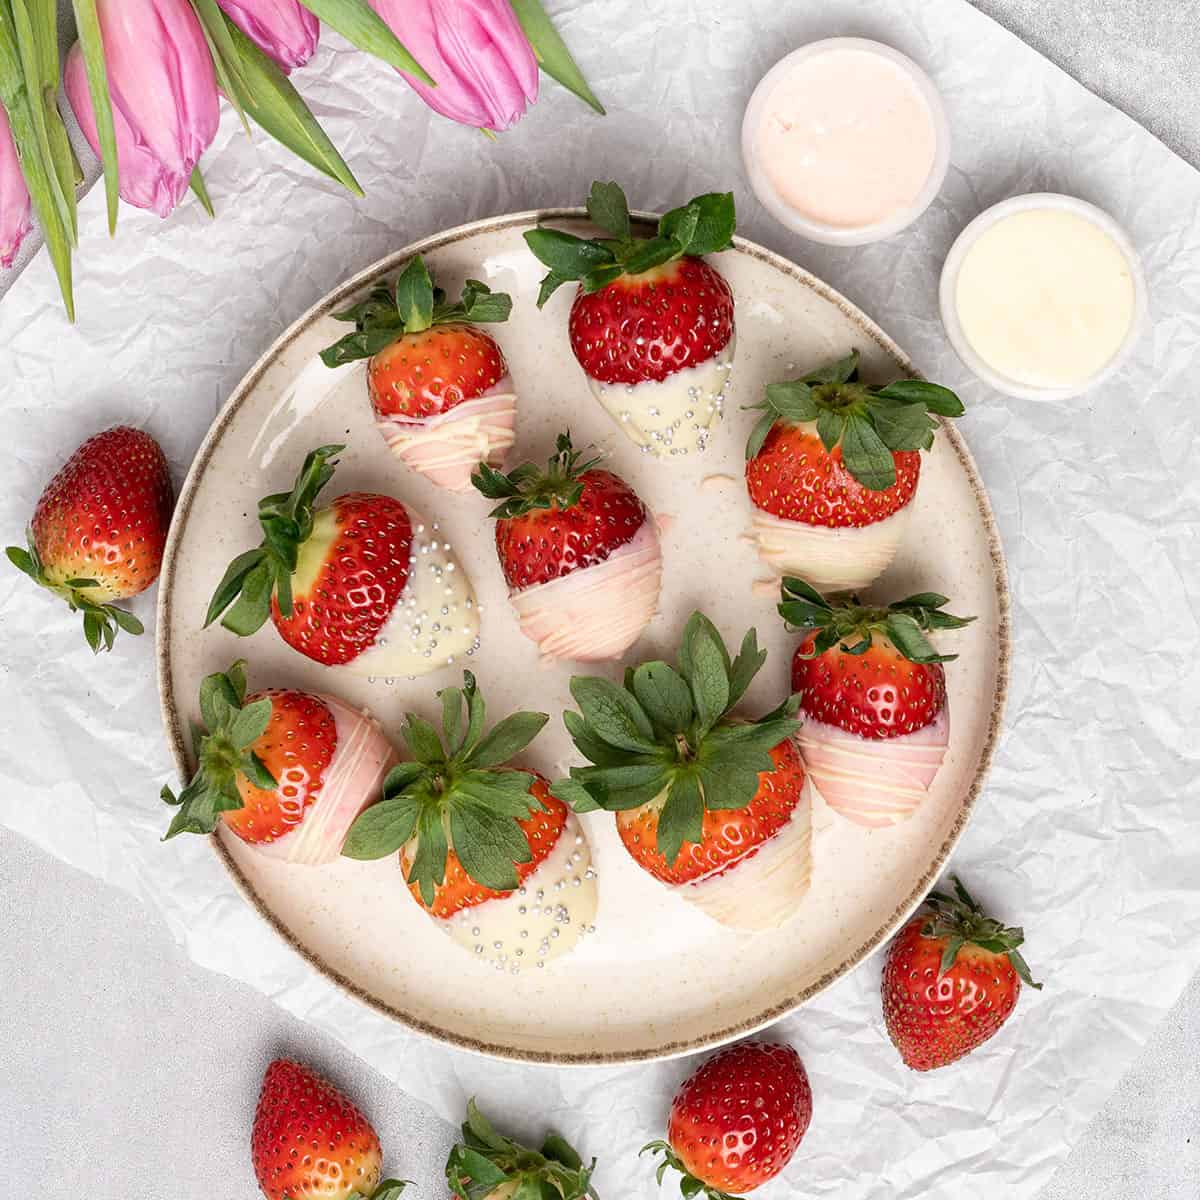 <p><a href="https://www.spatuladesserts.com/white-chocolate-covered-strawberries/">White chocolate-covered strawberries</a> make the perfect dessert or sweet treat! Fresh strawberries are dipped into molten white chocolate; one of the easiest desserts to impress your women family members.</p> <p><strong>Recipe: <a href="https://www.spatuladesserts.com/white-chocolate-covered-strawberries/">White chocolate-covered strawberries</a></strong></p>